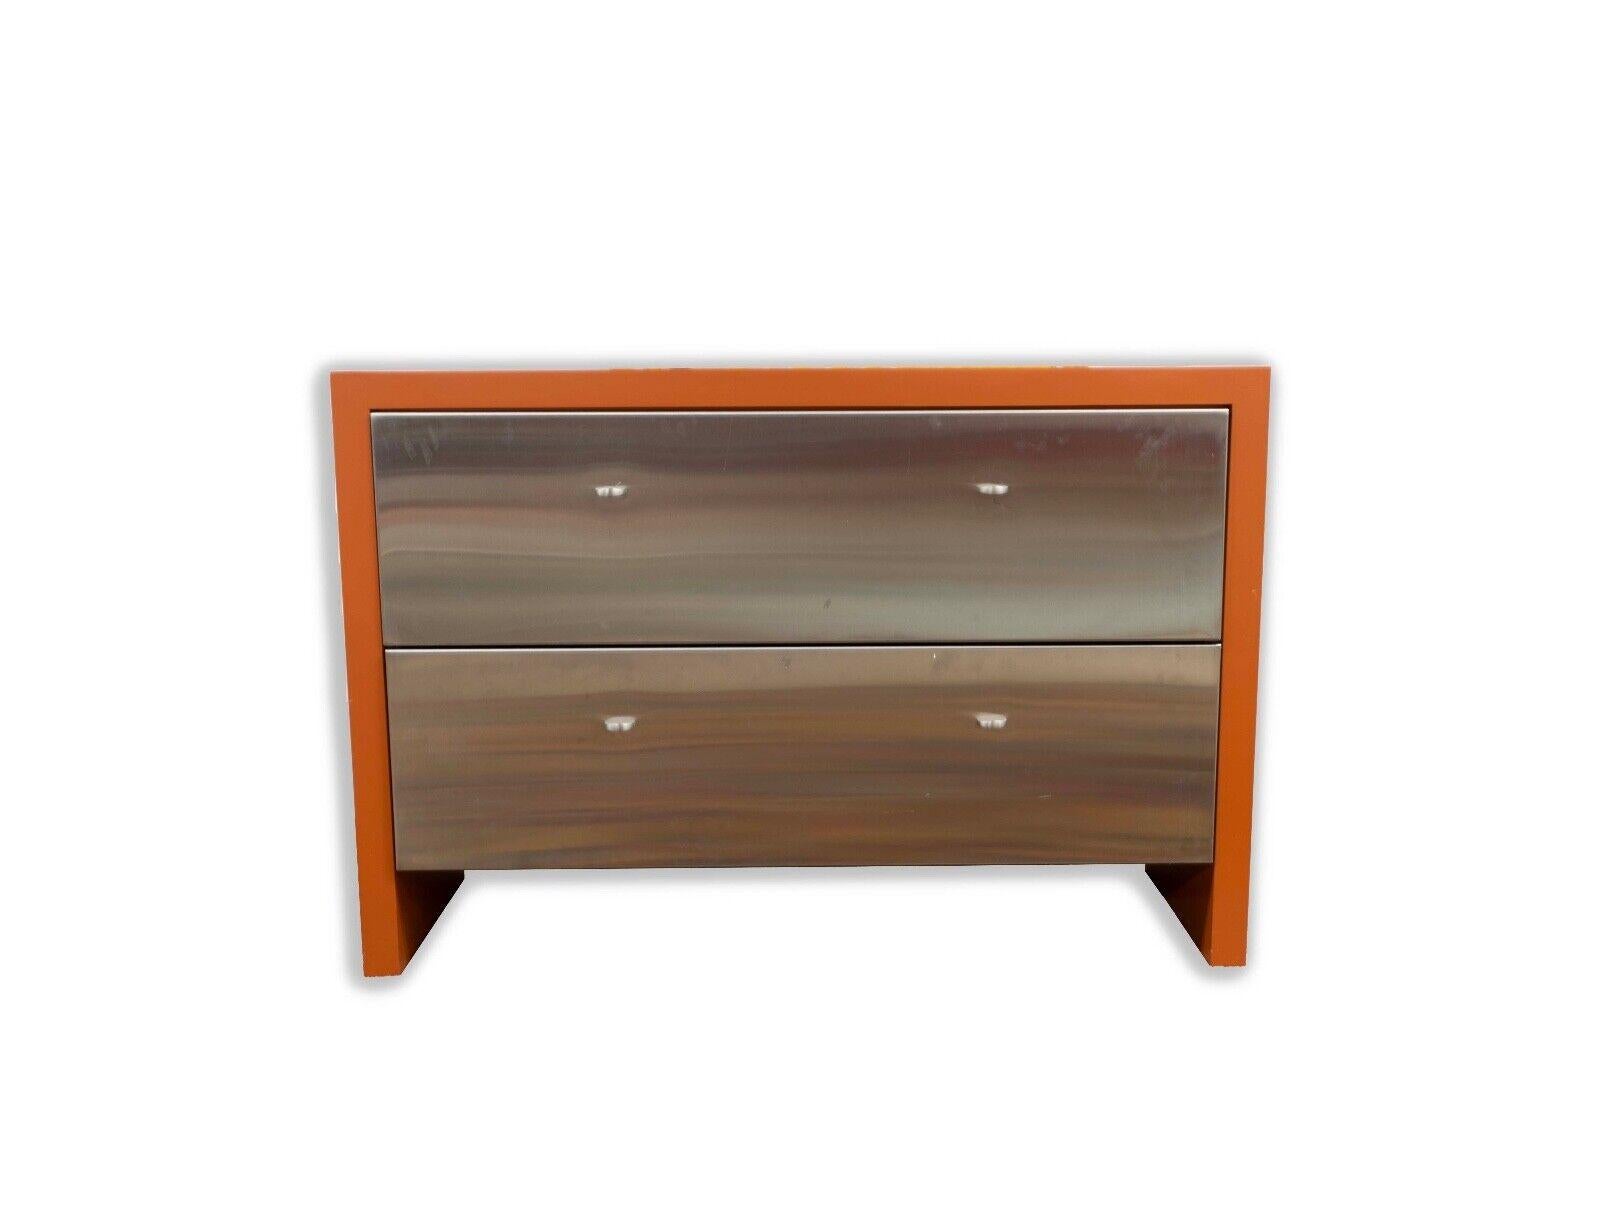 This contemporarymodern dresser boasts a striking combination of stainless steel drawers encased in a vibrant orange lacquer frame, exuding a retro yet contemporary charm. The piece's clean lines and contrasting colors create a bold statement, while